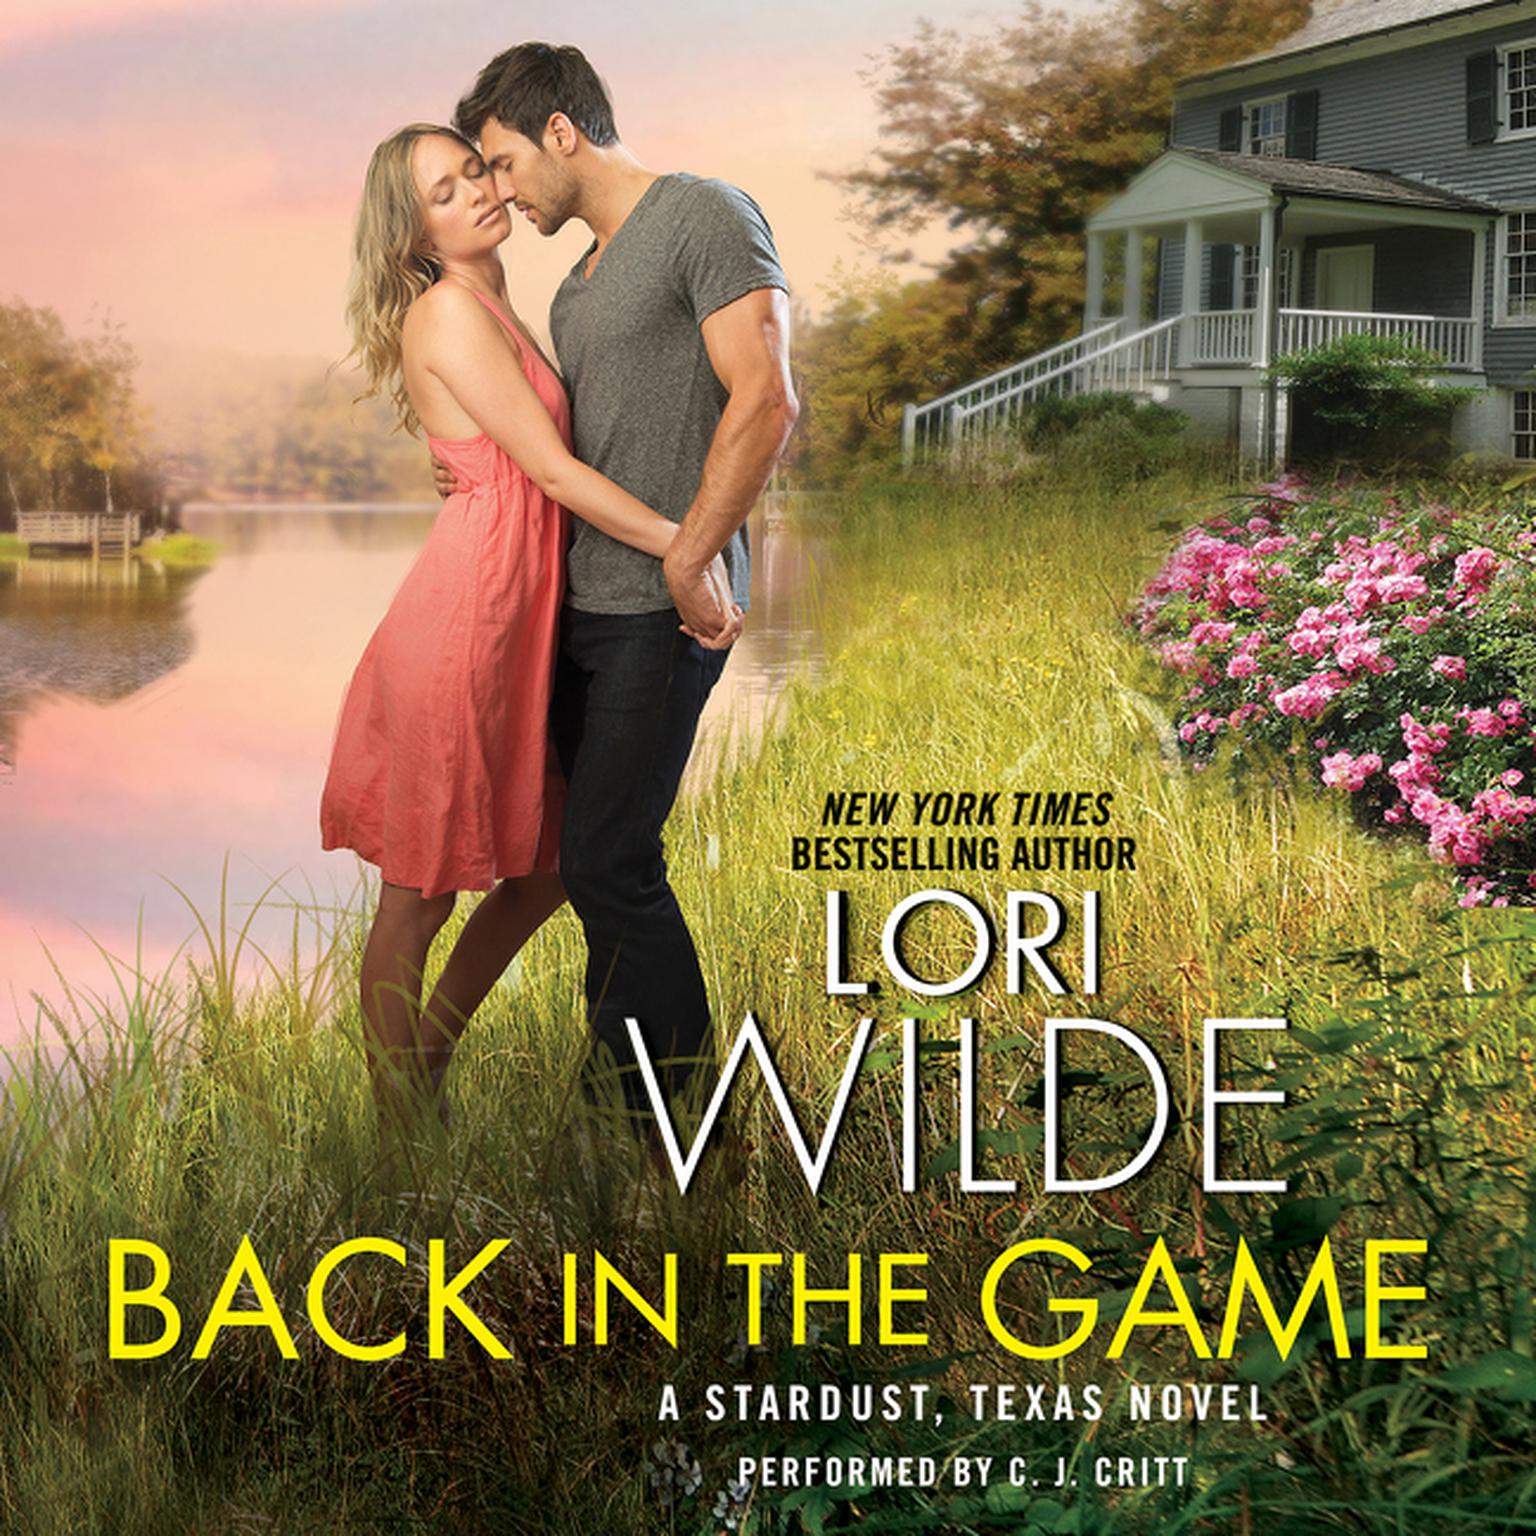 Back in the Game: A Stardust, Texas Novel Audiobook, by Lori Wilde